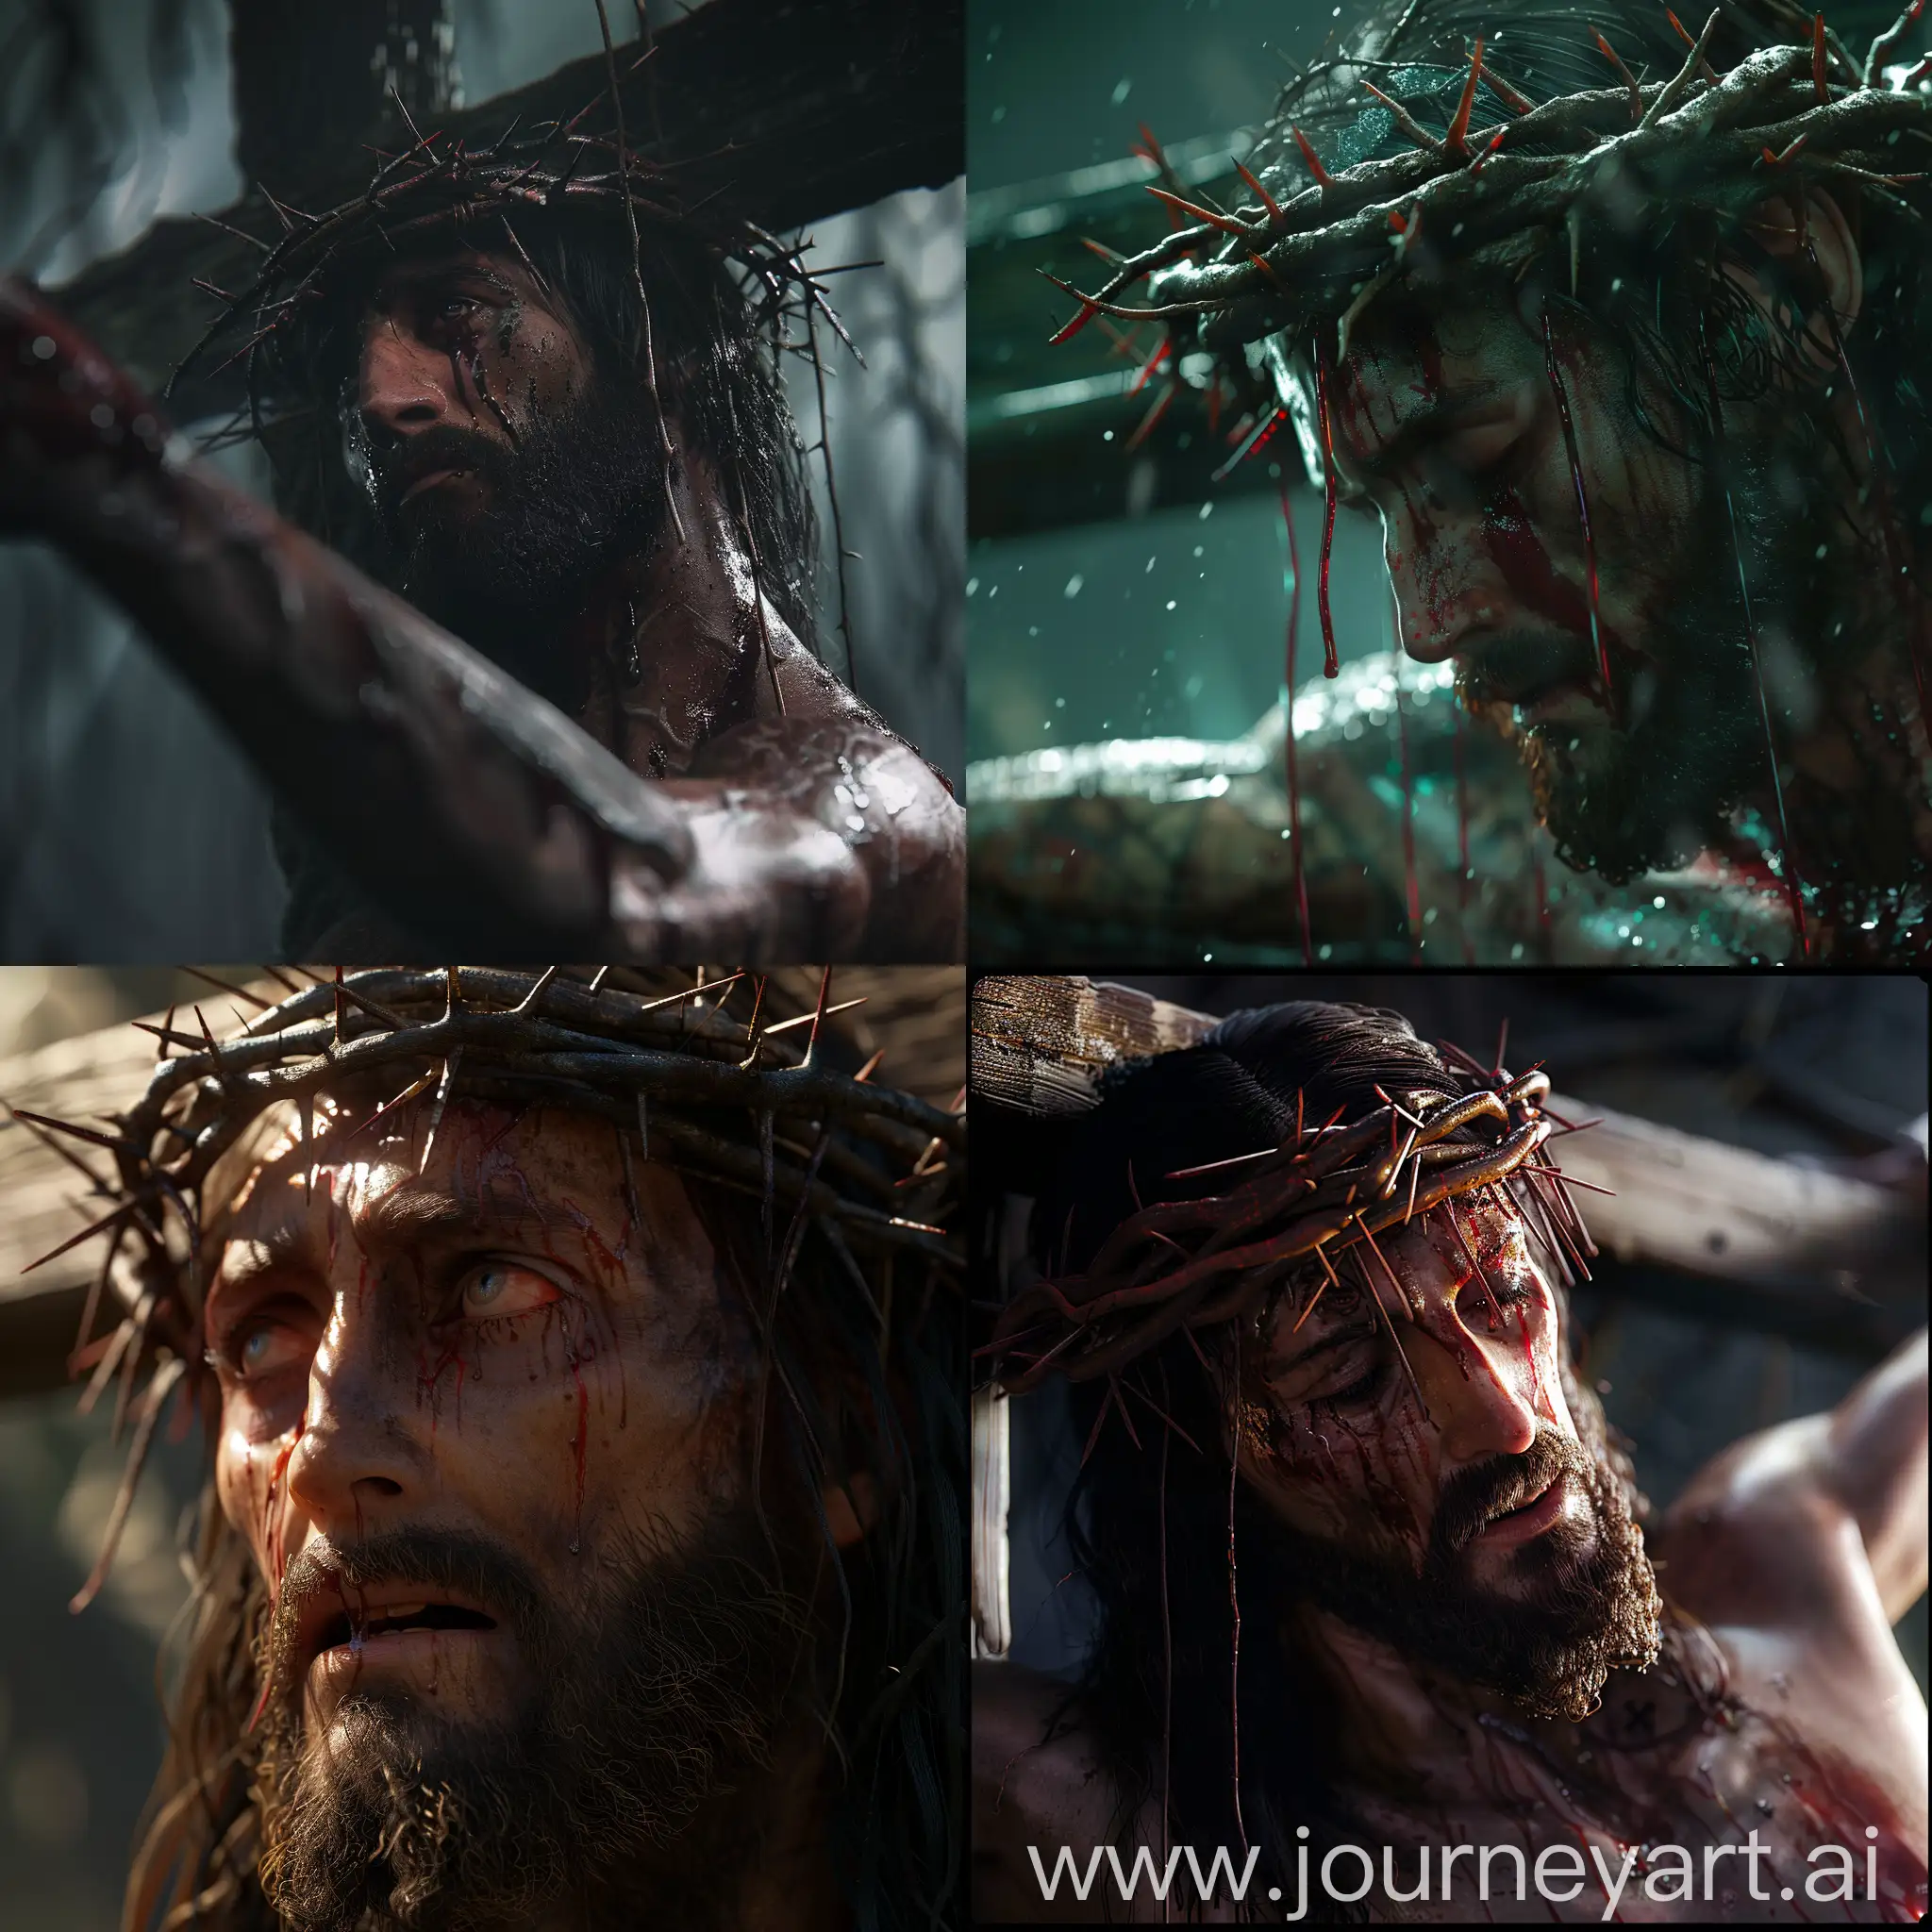 Cinematic-Ultra-Realistic-Depiction-of-Jesus-Crucified-with-Crown-of-Thorns